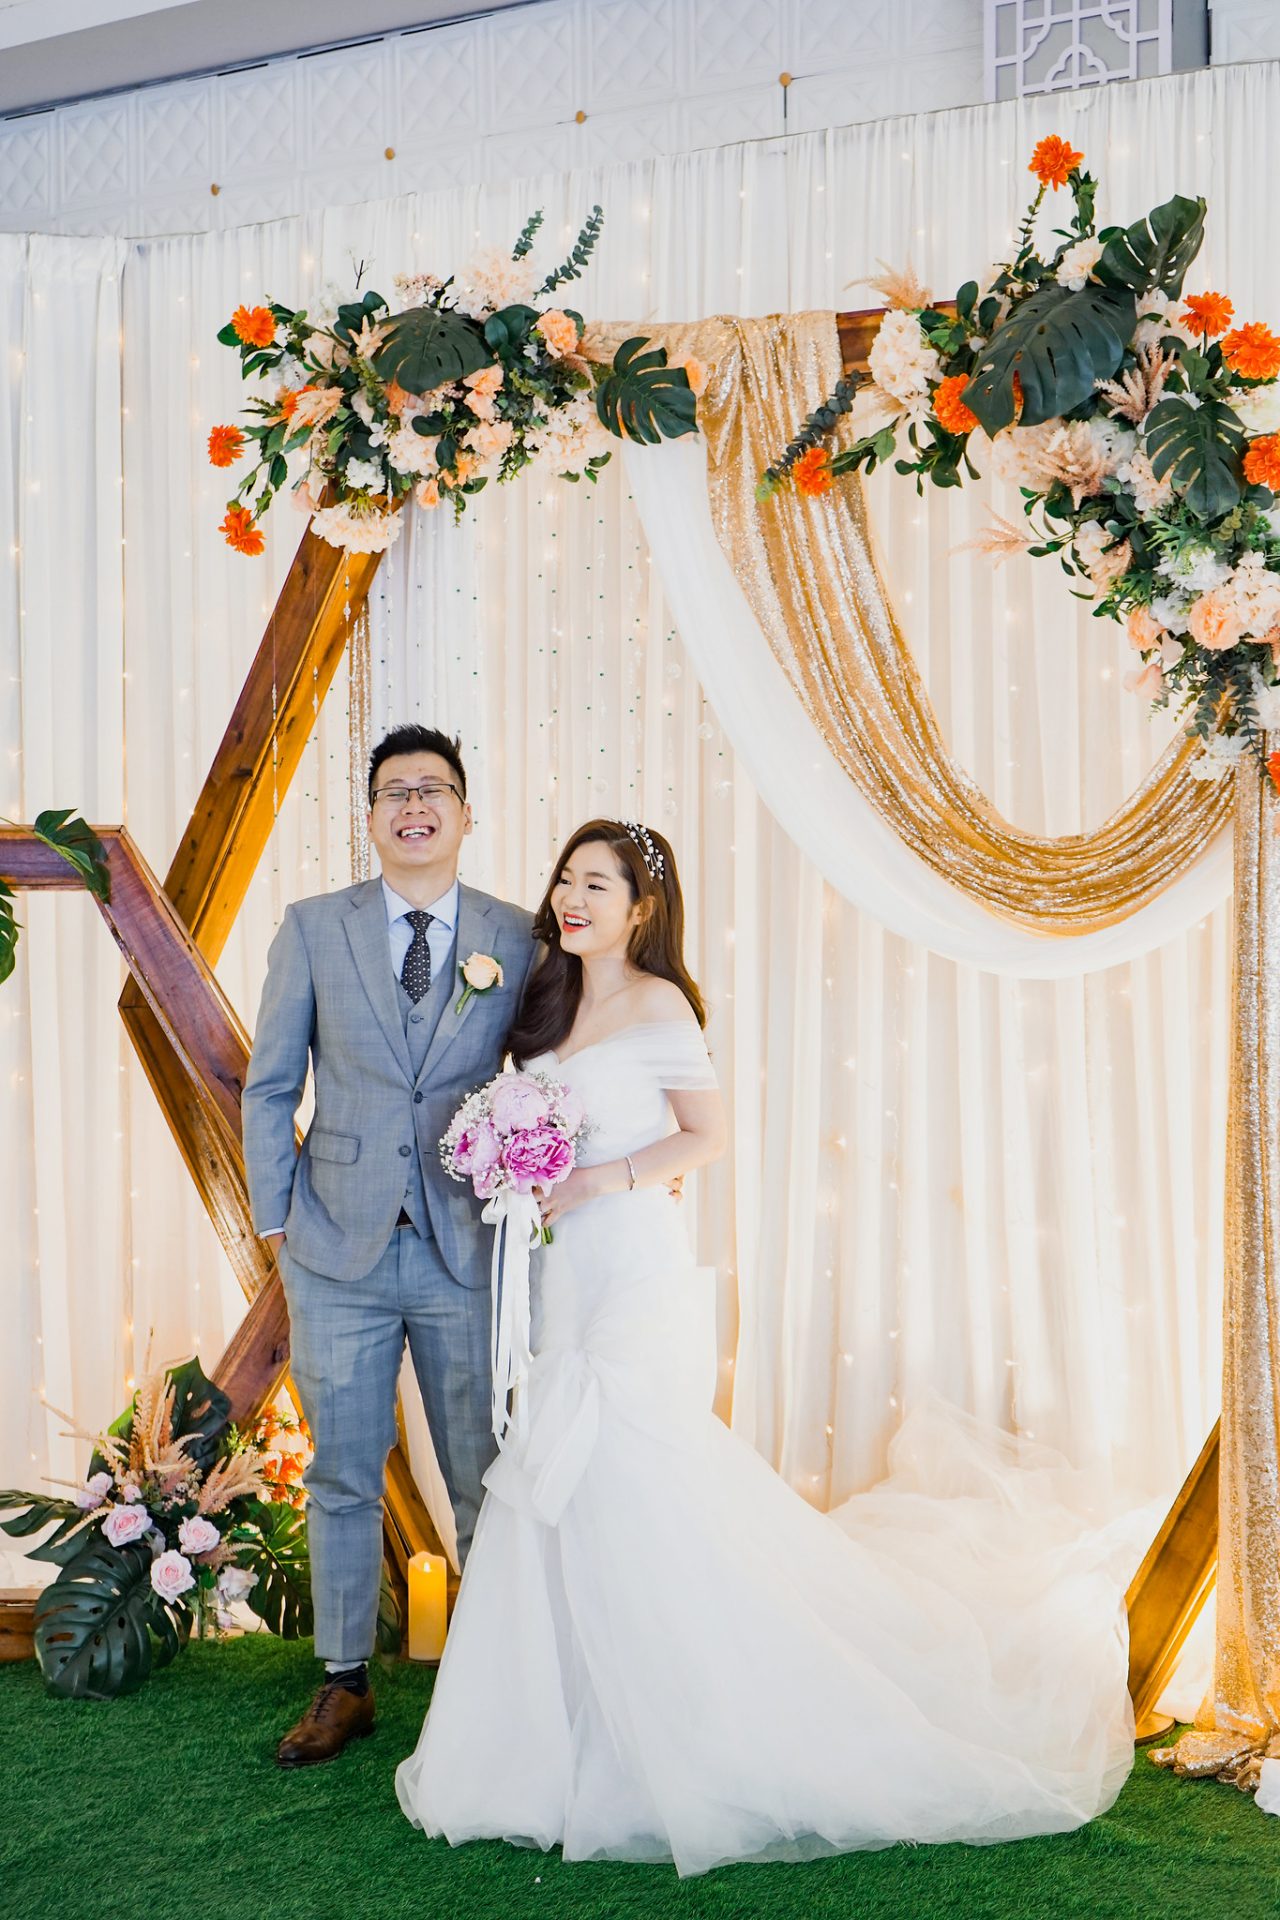 Orange is the happiest color | HẰNG & DUY | 2019